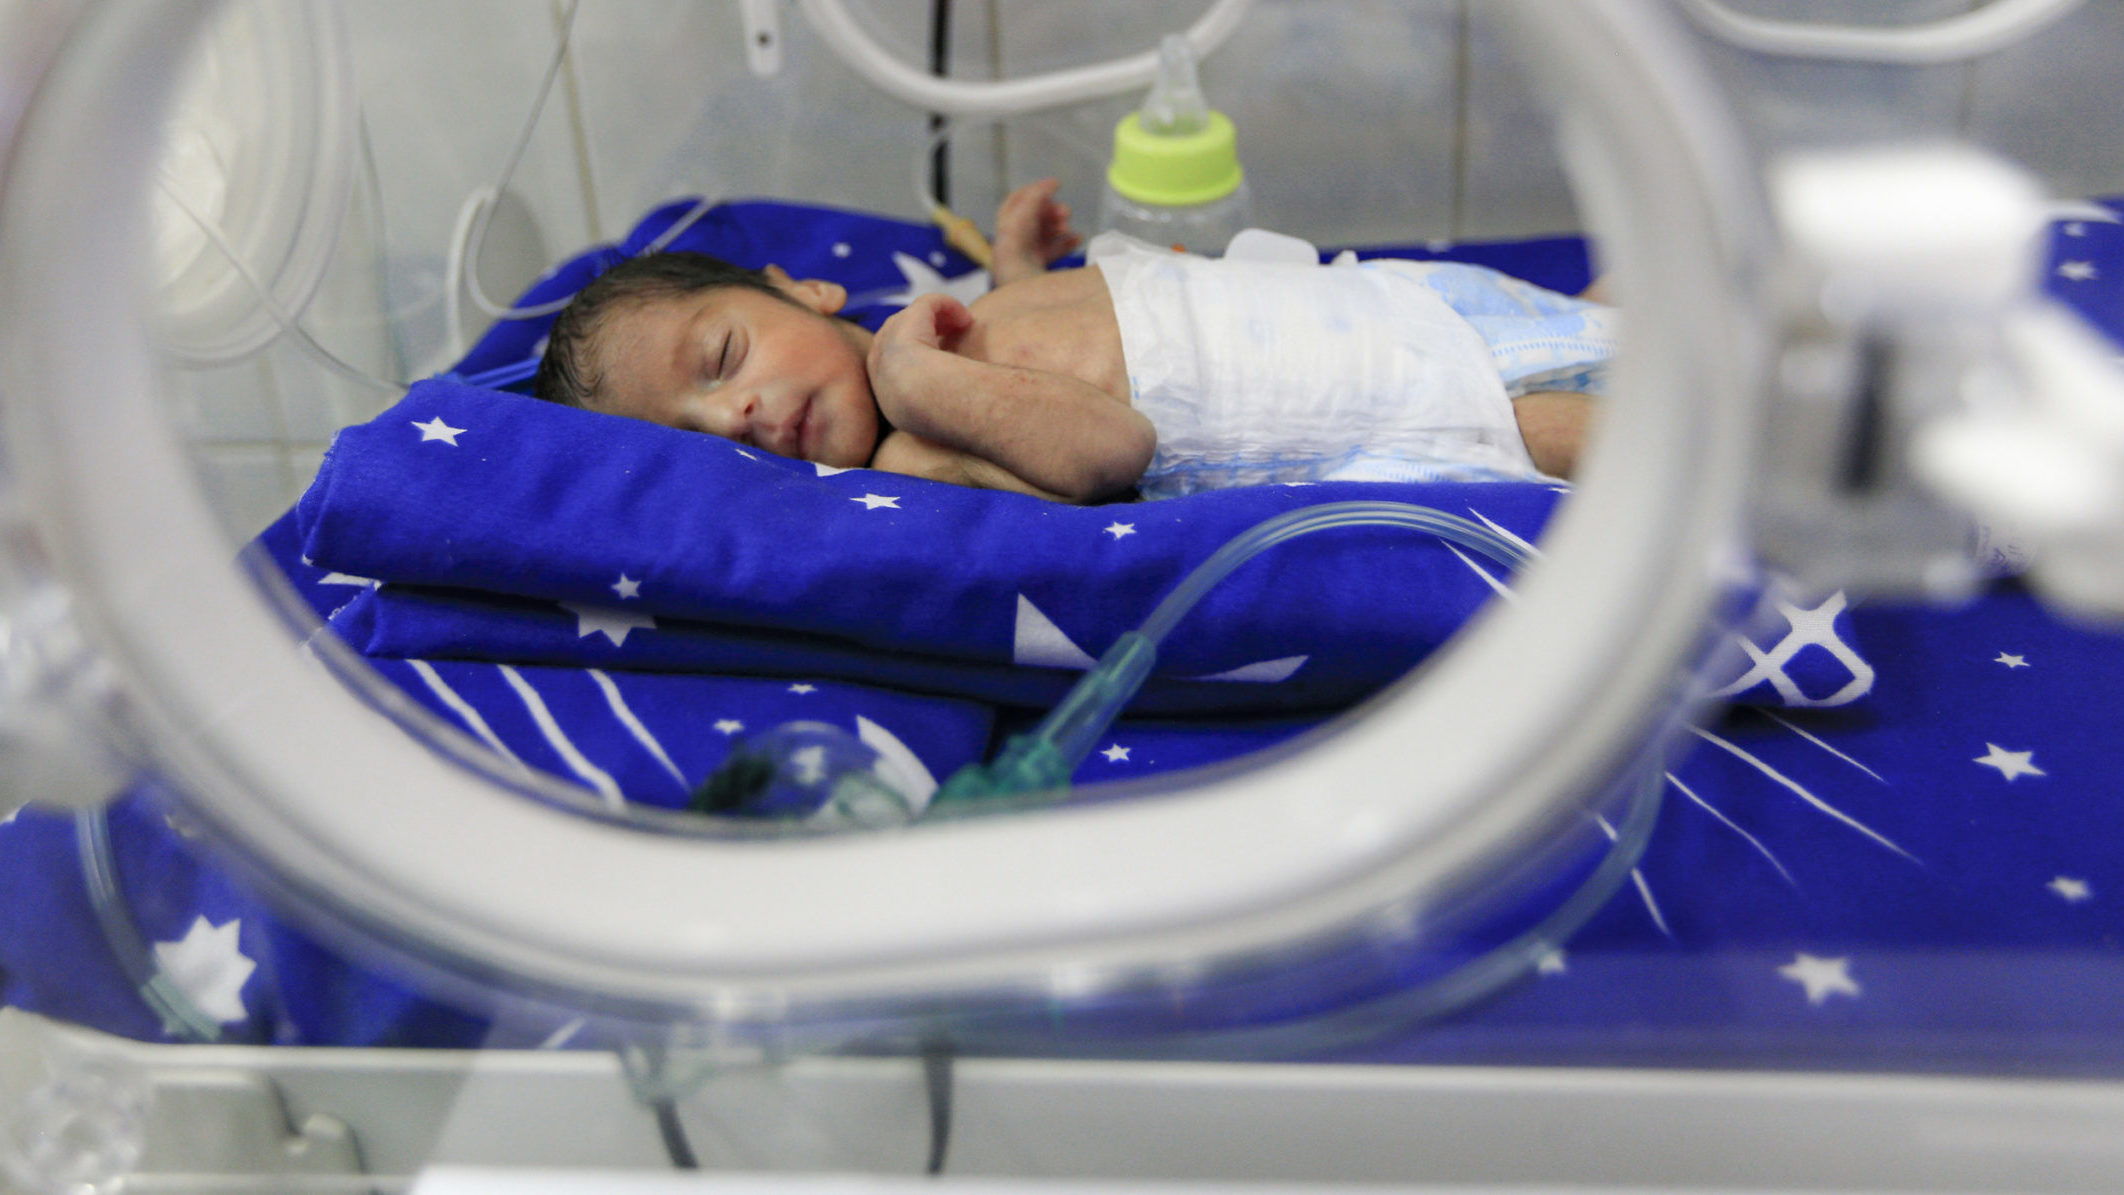 UNFPA: 30,000 Women in Yemen Could Die from Lack of Reproductive Health Care